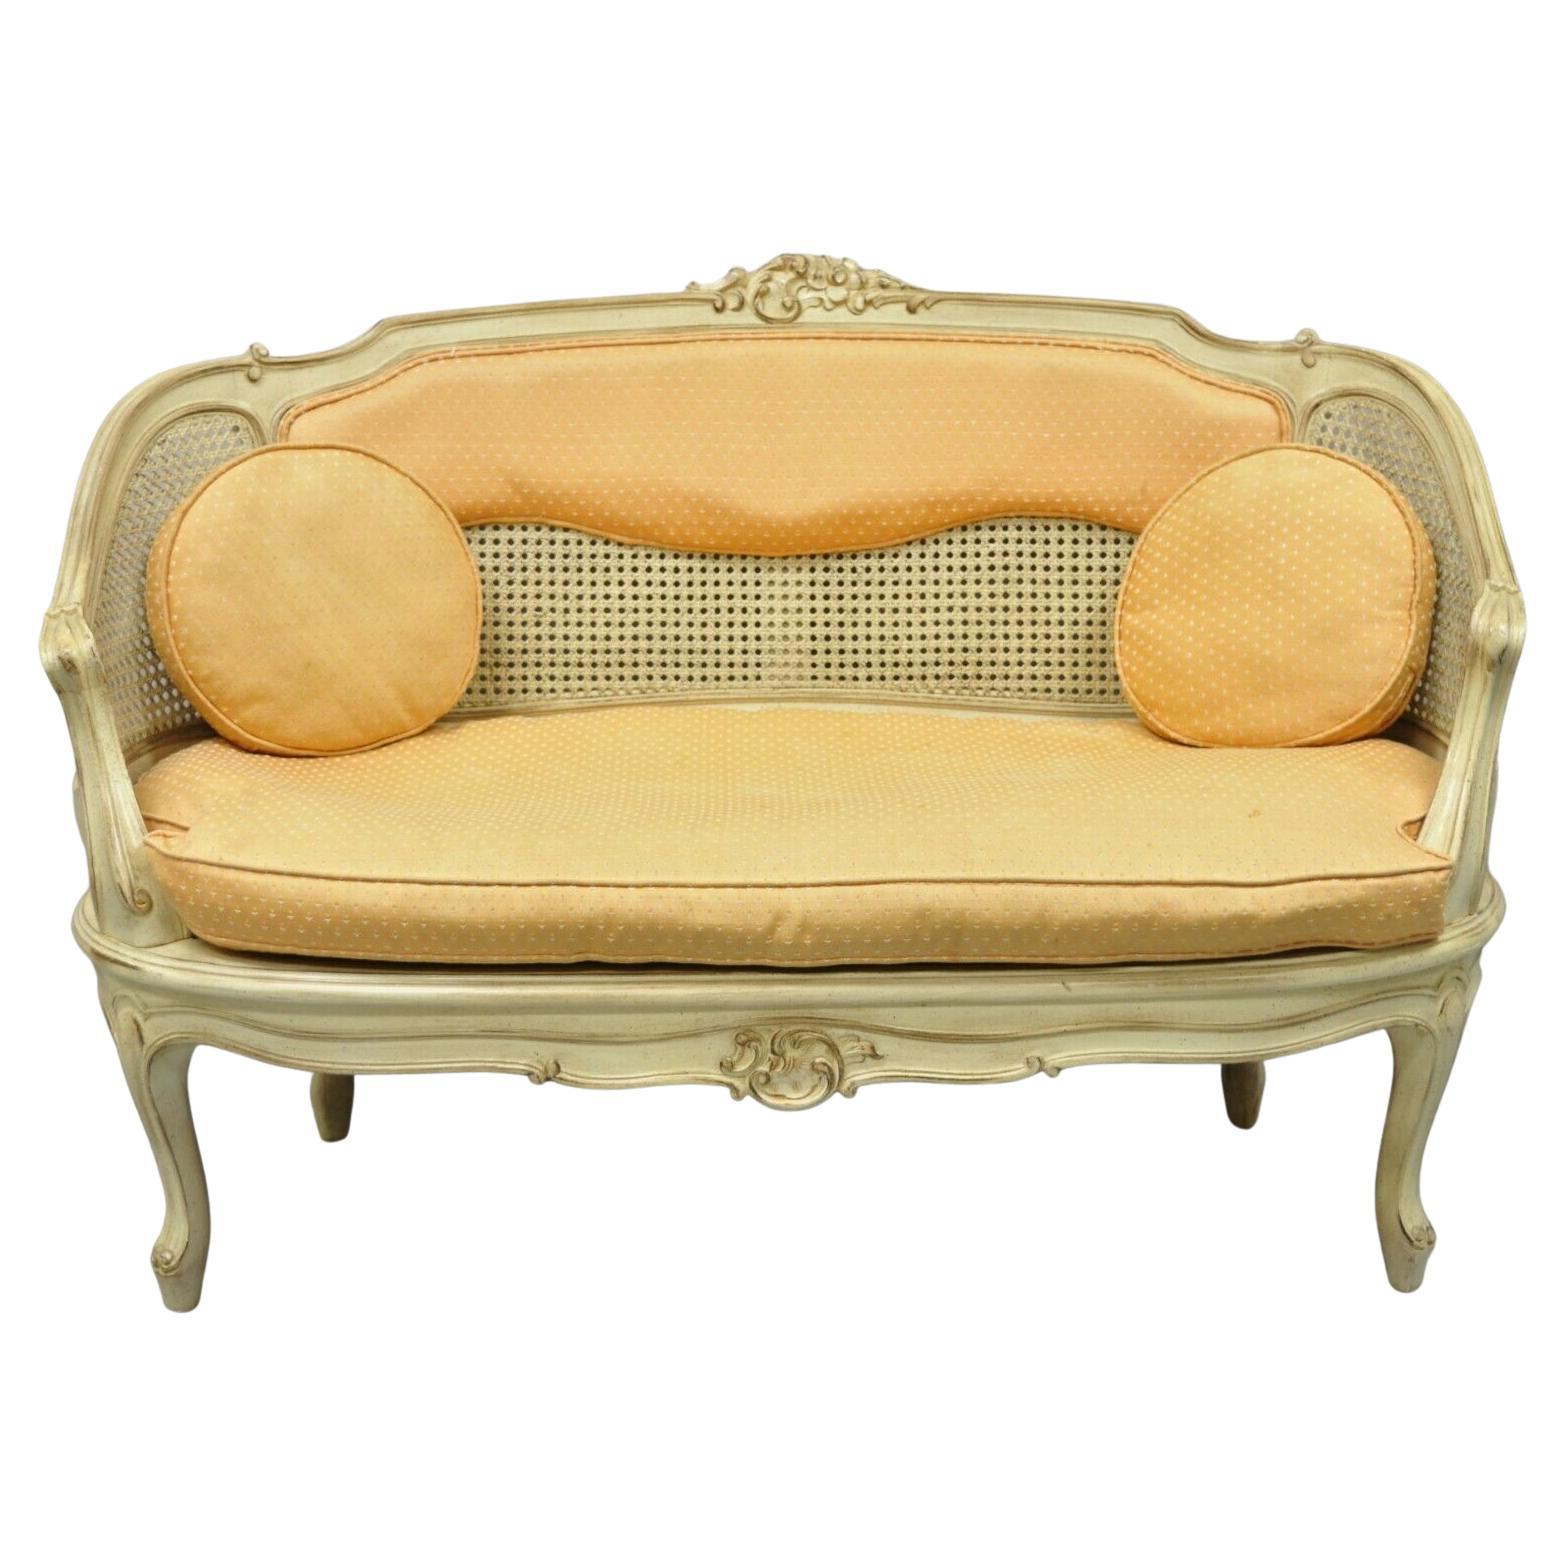 Vintage French Louis XV Victorian Style Small Cane Cream Settee Loveseat Sofa